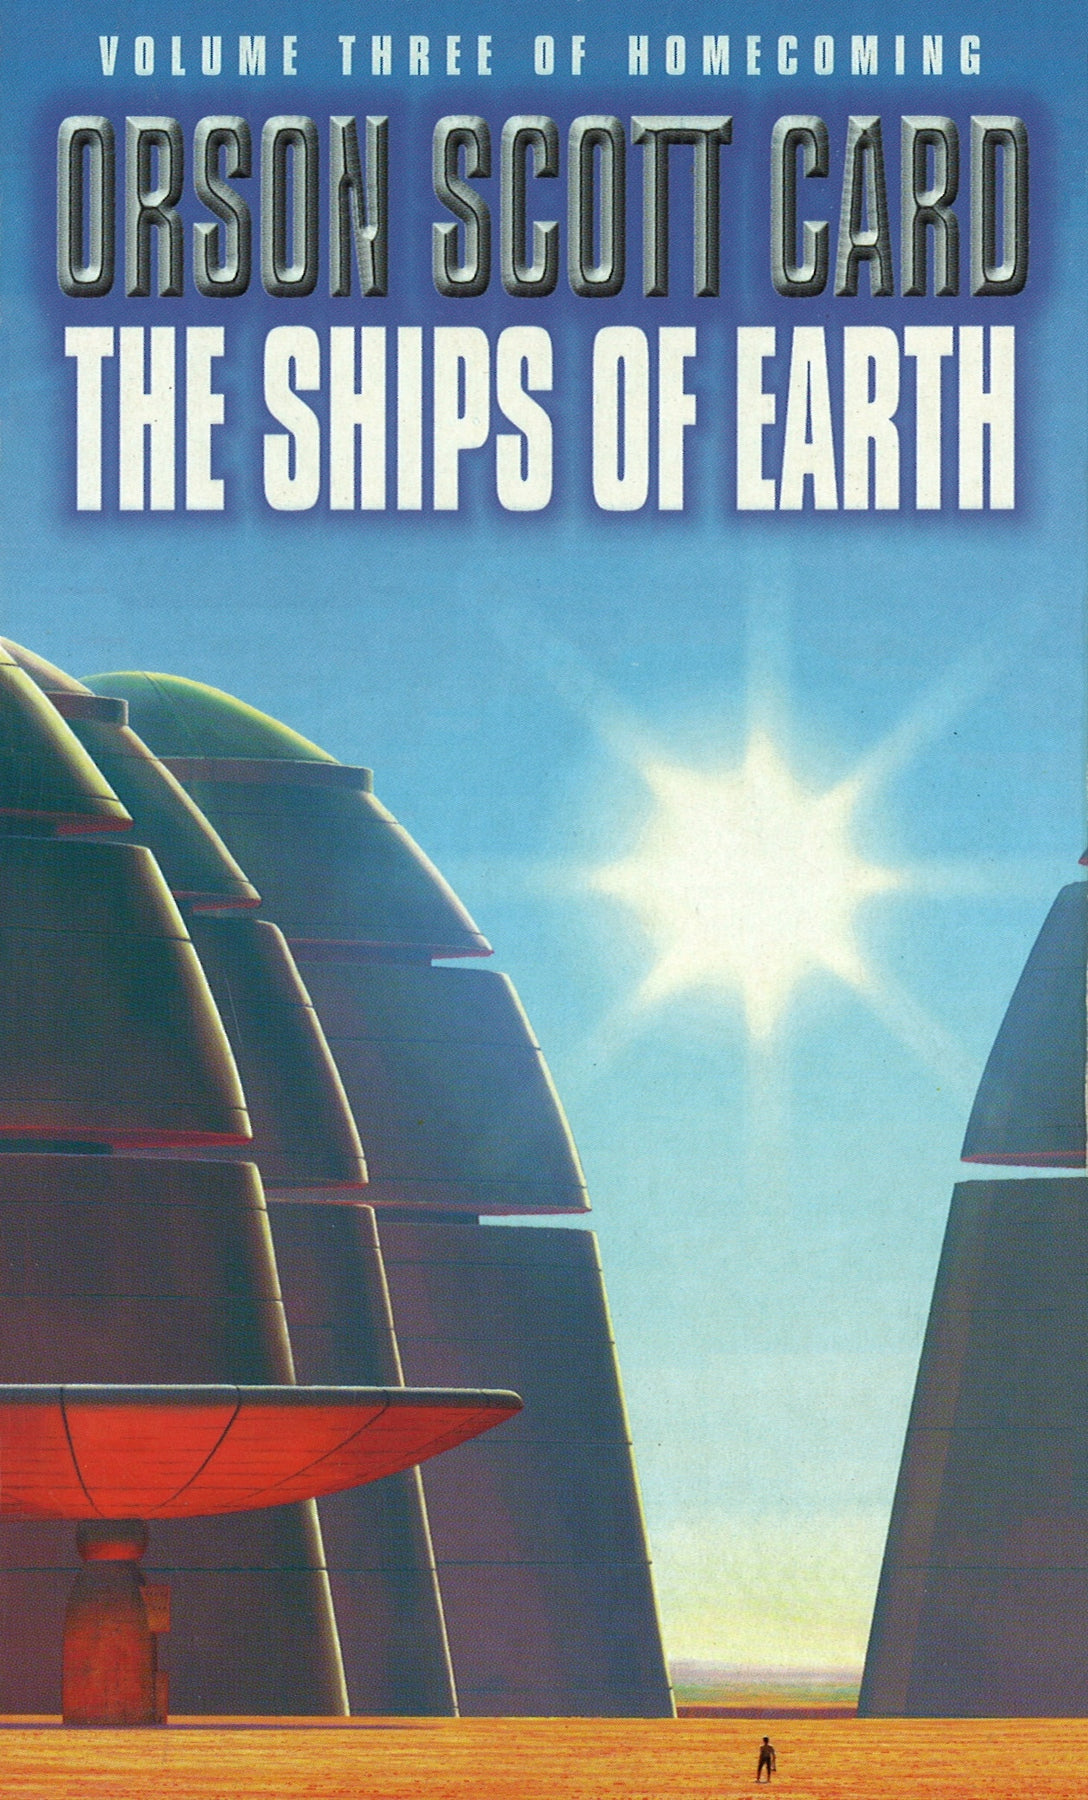 The Ships Of Earth by Orson Scott Card